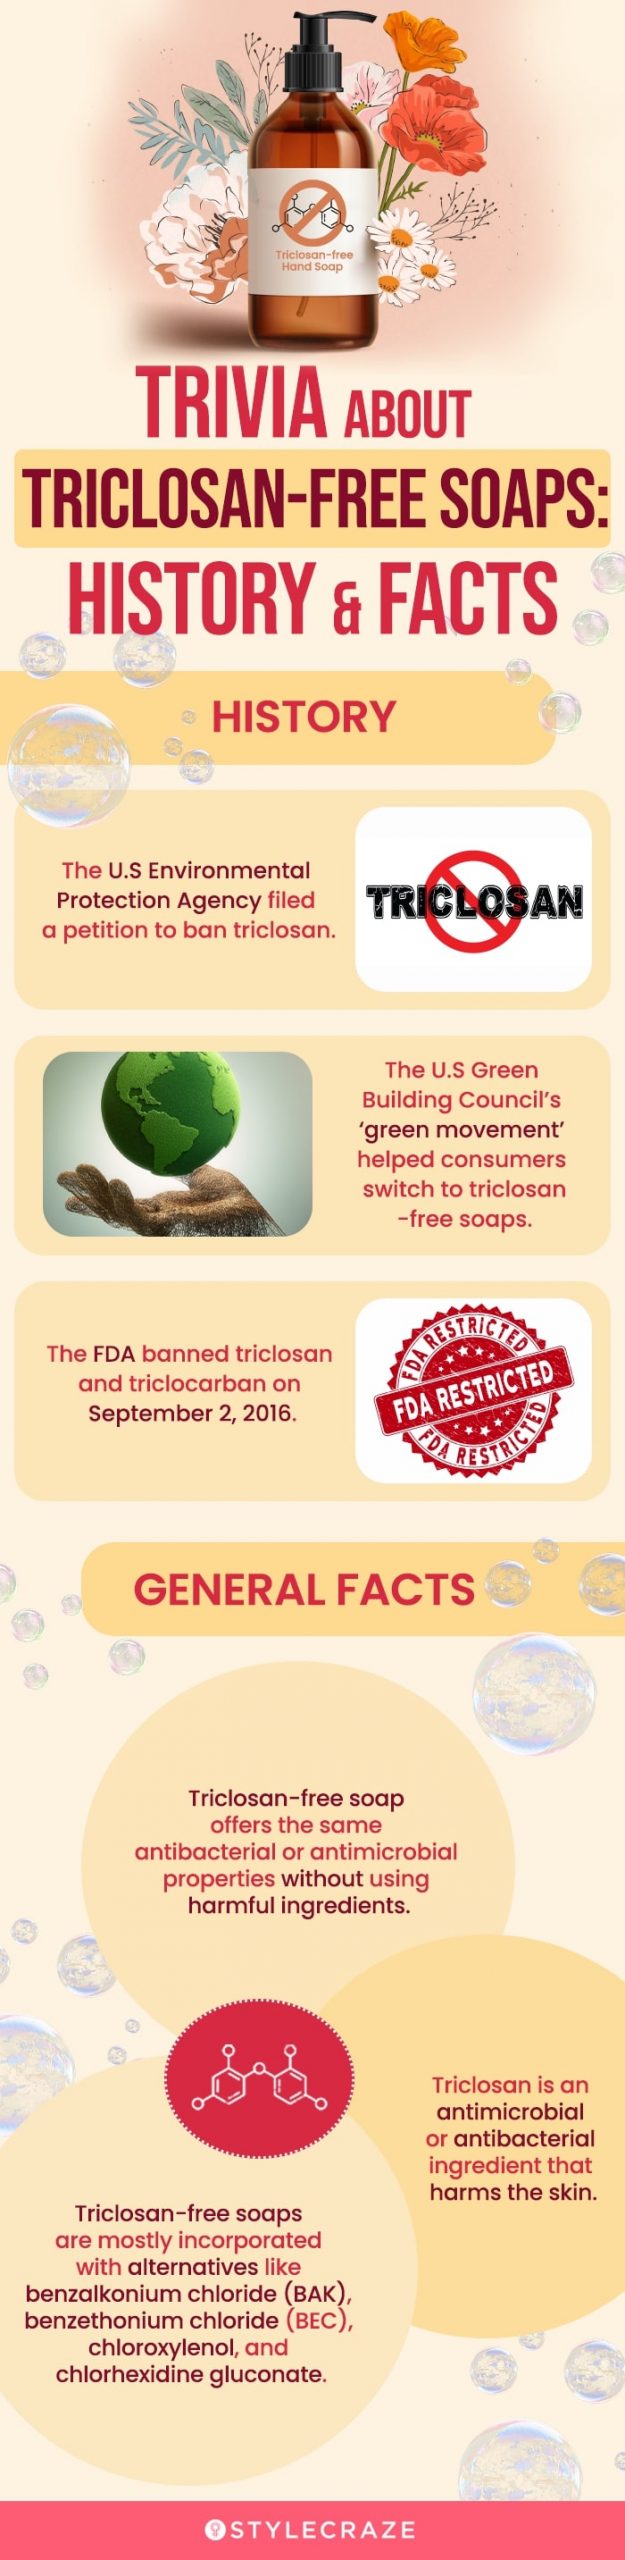 Trivia About Triclosan-Free Soaps: History & Facts (infographic)